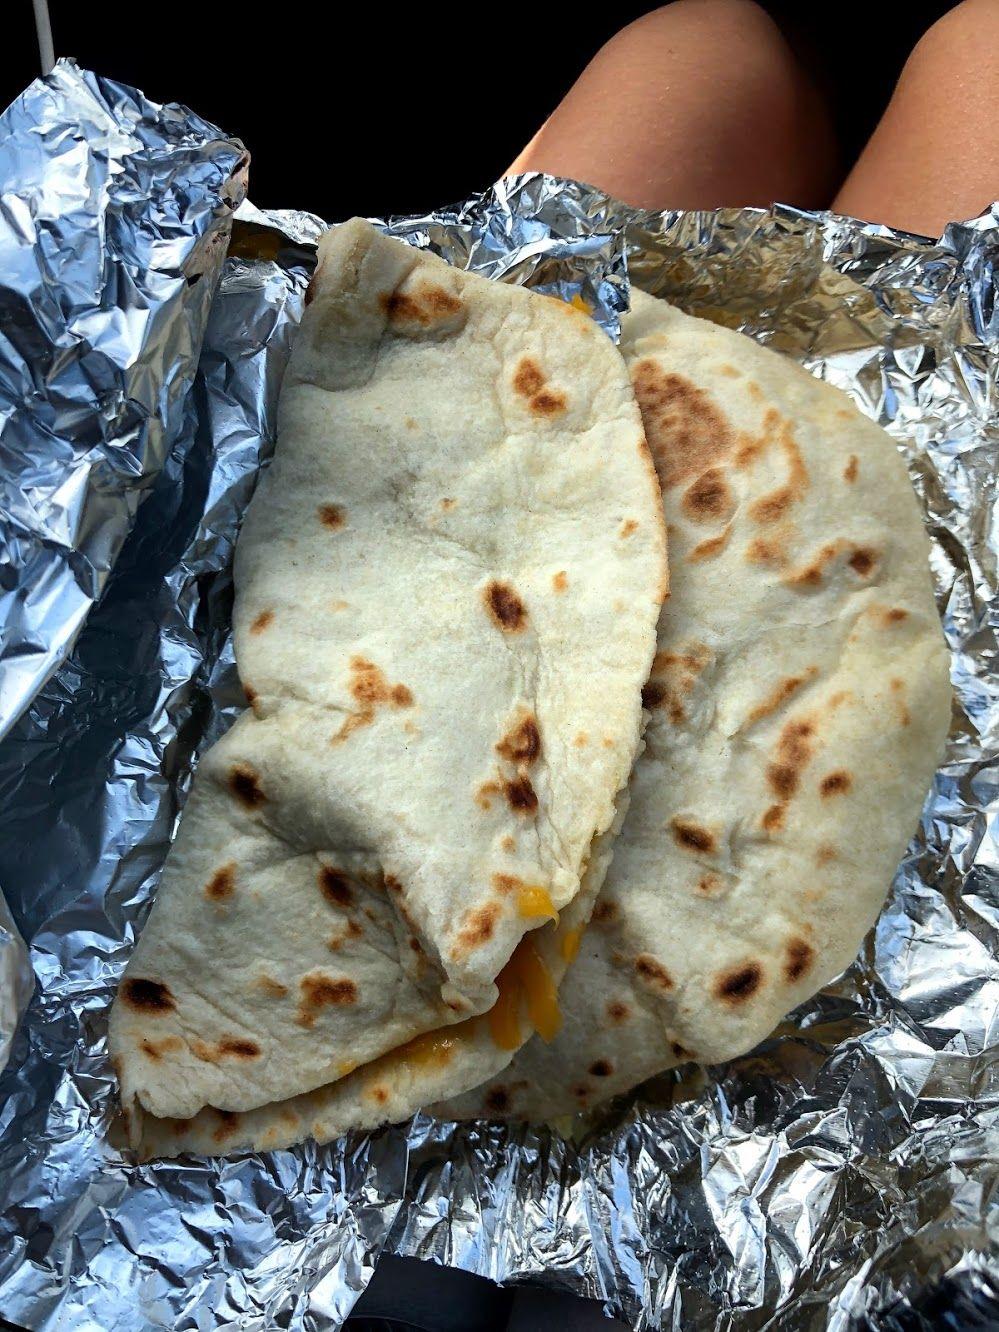 A close up of two tacos sitting on aluminum foil.